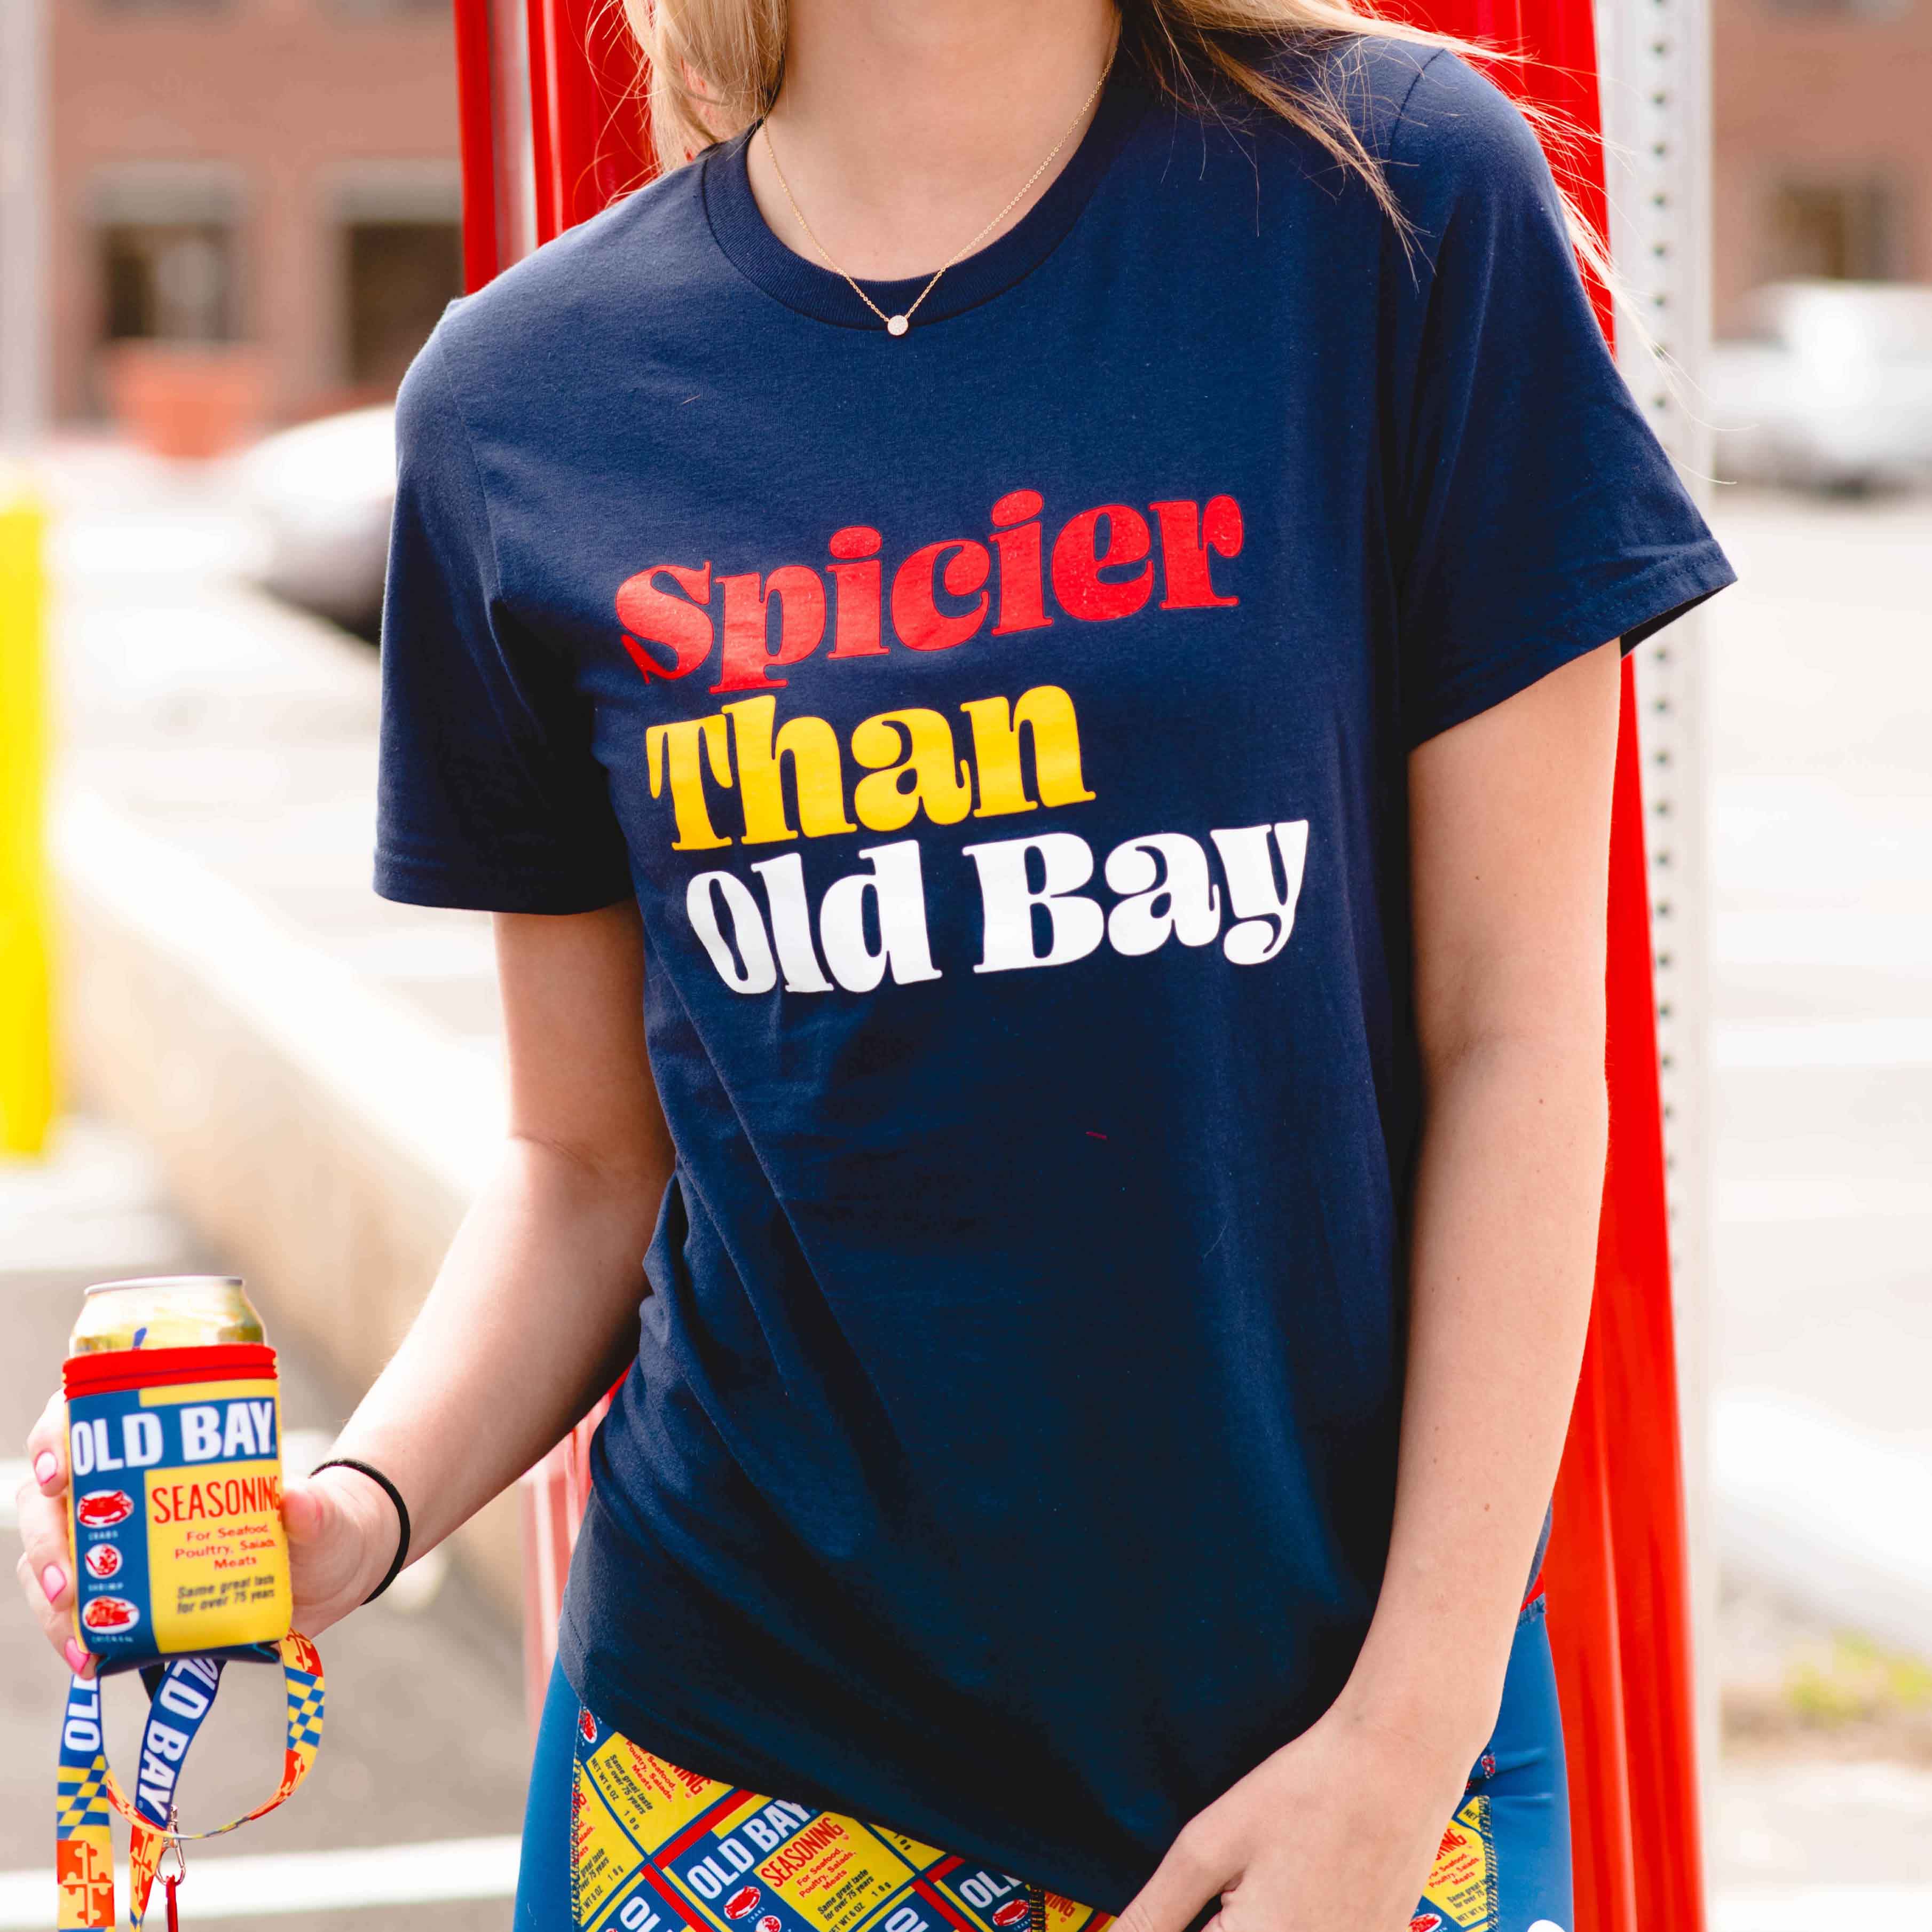 Spicier Than OLD / BAY Route Apparel (Navy) Shirt One 